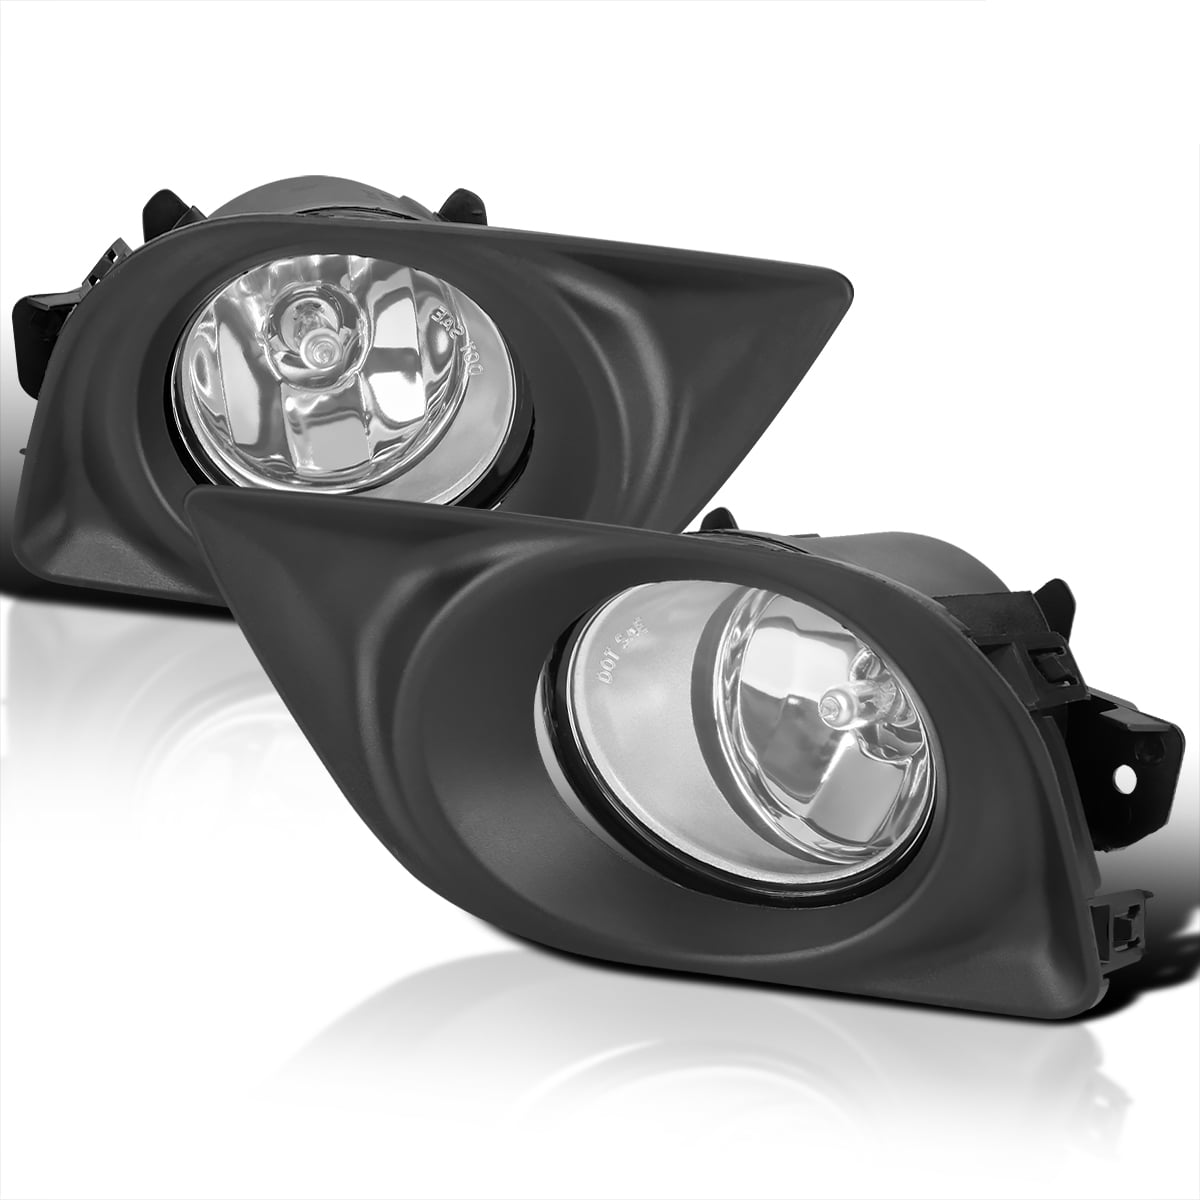 Winjet Fog Lights Compatible With 2013-2015 Mazda CX-5 2014 Clear ABS Plastic Fog Light Lamps & Switch Kit 